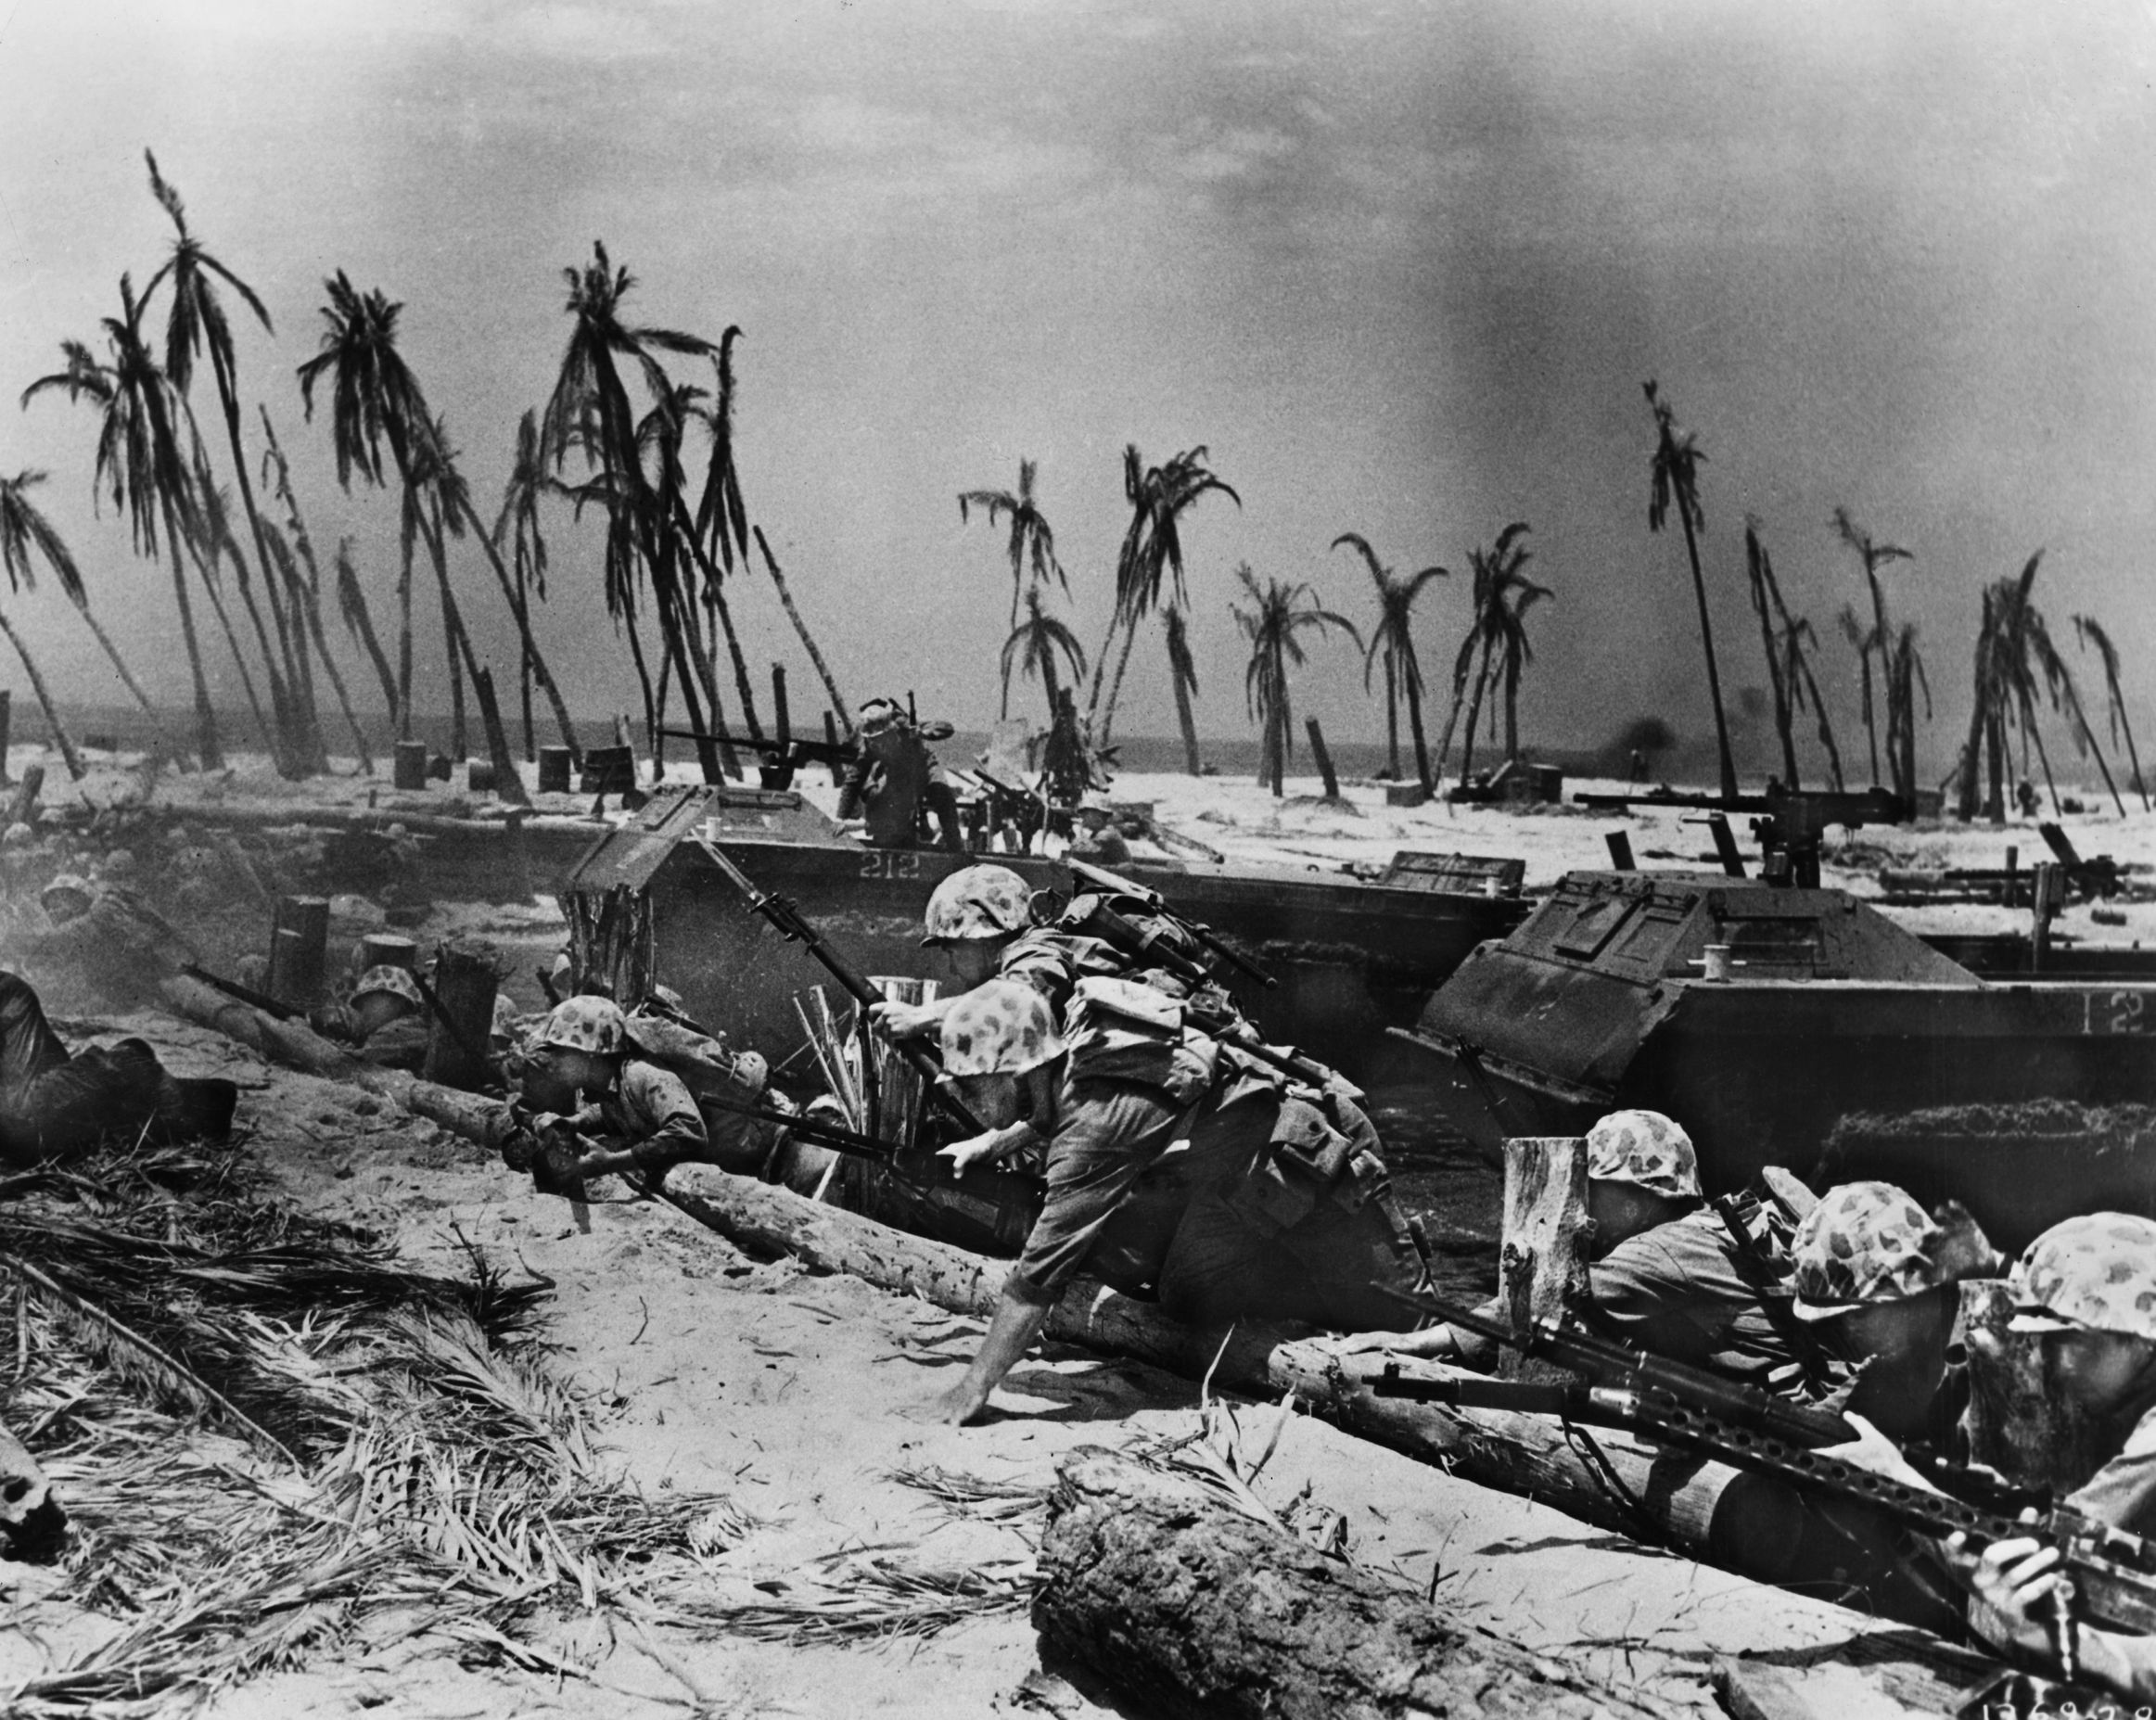 Looking like actors in a Hollywood war film, U.S. Marines climb a log seawall along one of the three Red Beaches at Betio; amphibious tractors (amtracs) are visible behind them. The fight for Tarawa Atoll, November 20-23, 1943, cost the Marines dearly; however, valuable lessons were learned for future U.S. amphibious operations.